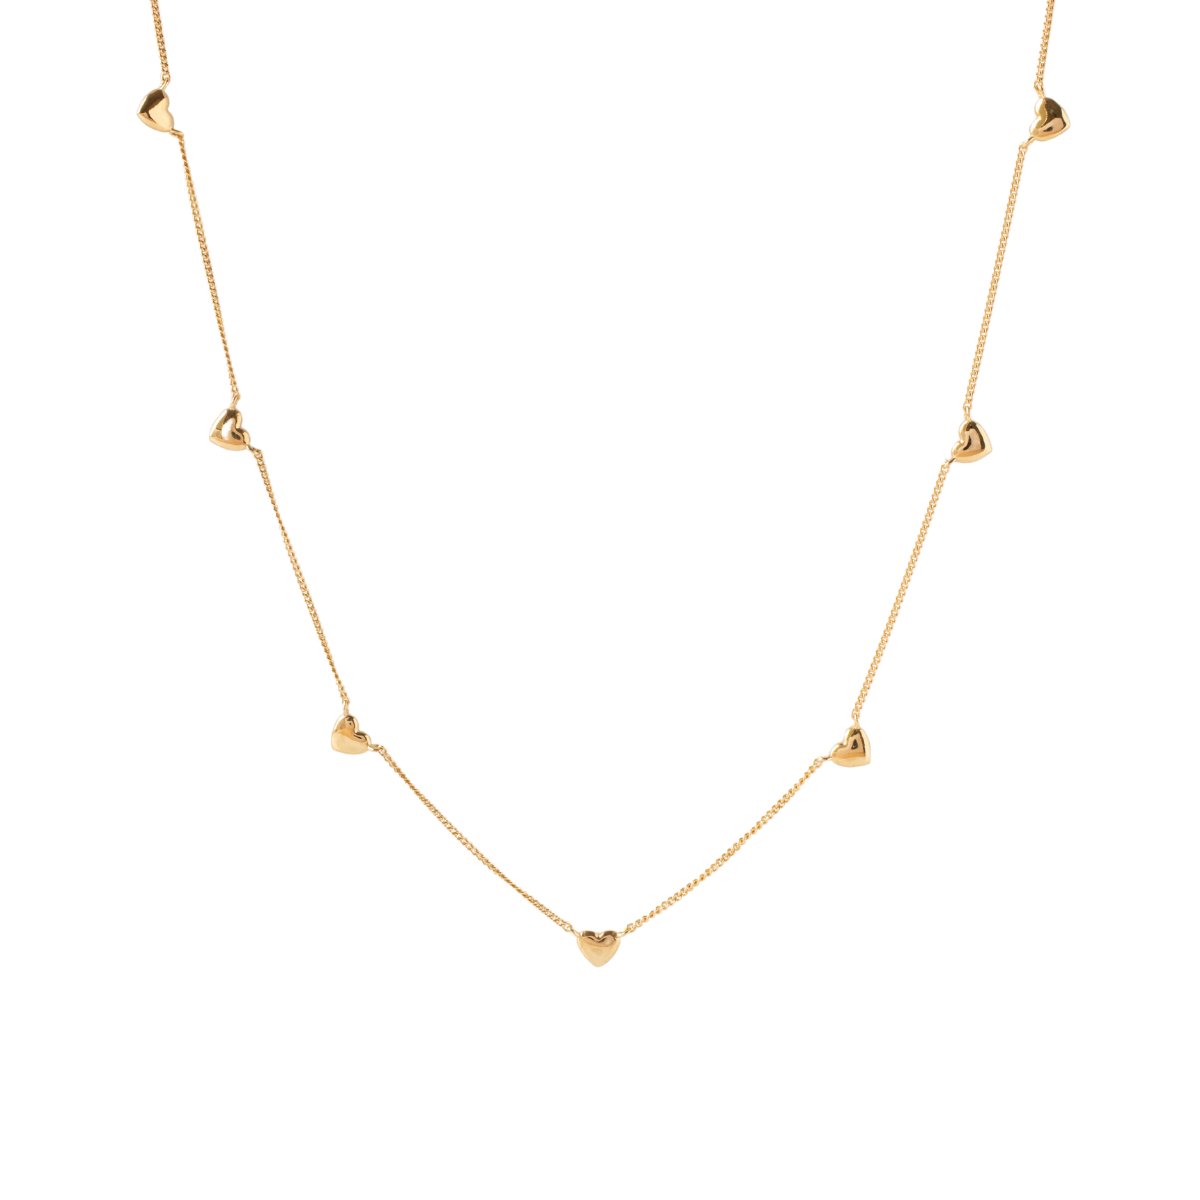 DAINTY POISE HEART NECKLACE - GOLD - SO PRETTY CARA COTTER